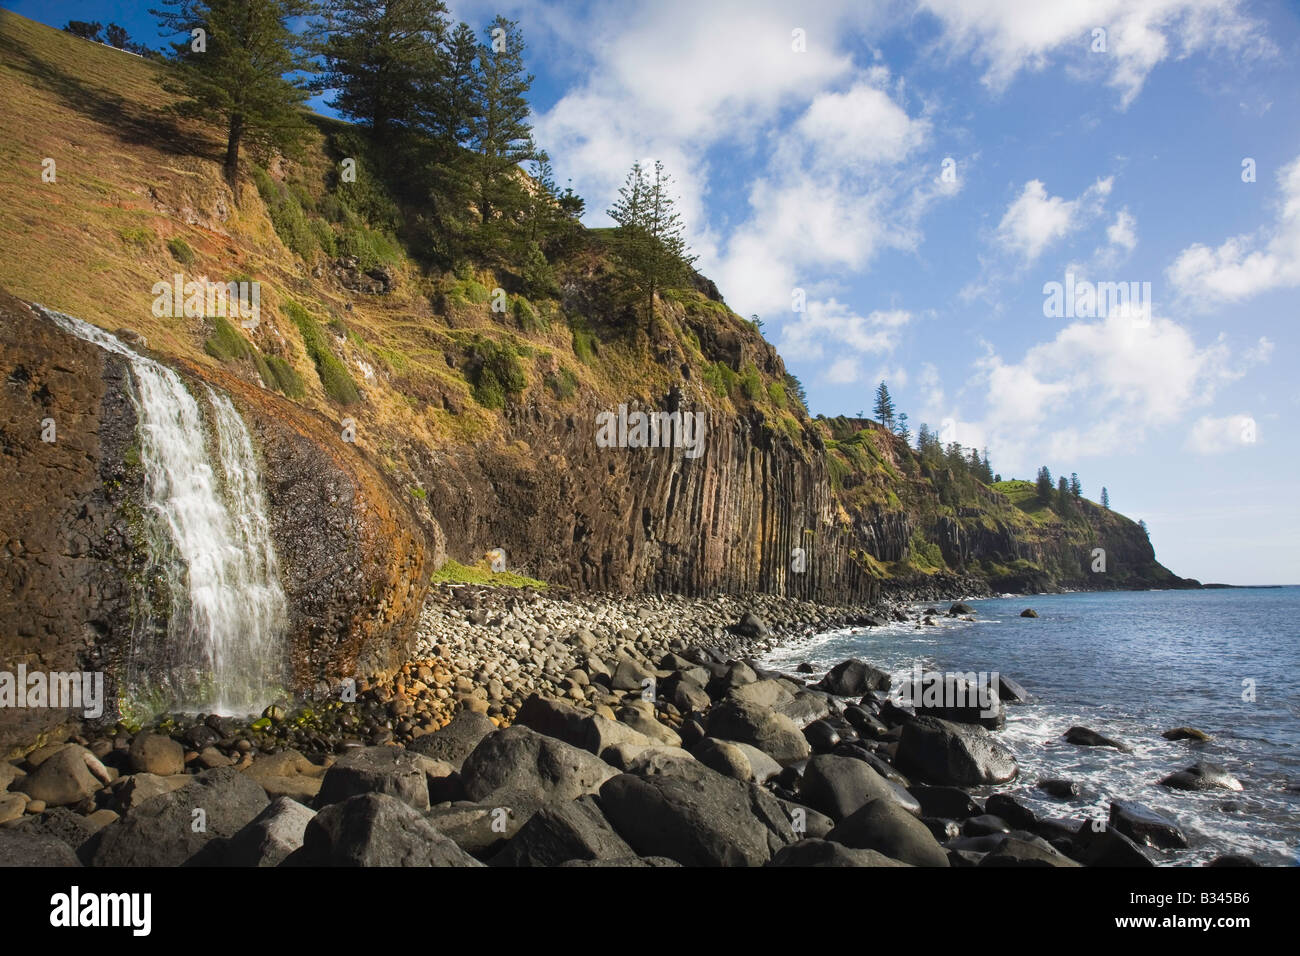 A view looking up to Cockpit Waterfall surrounded by rocks and Norfolk Pine trees on a bright winters day in Norfolk Island, Australia Stock Photo